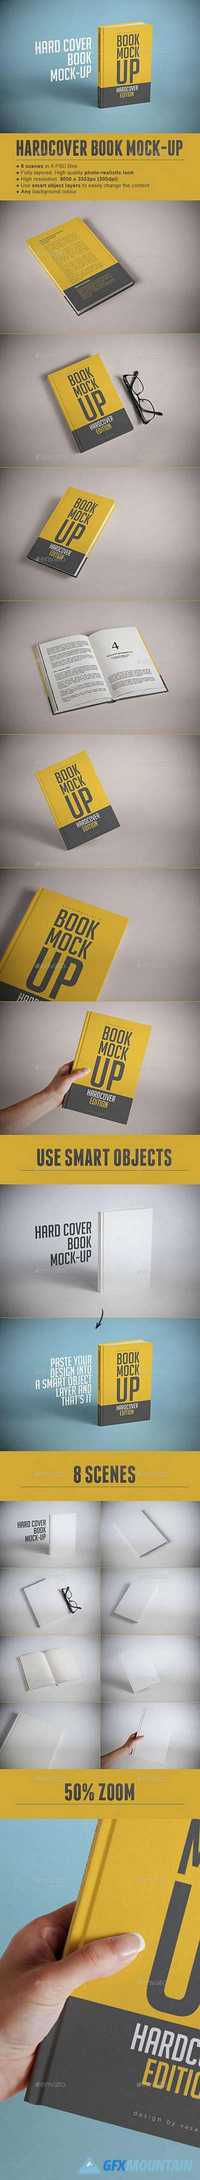 Hardcover Book Mock-up 17690220